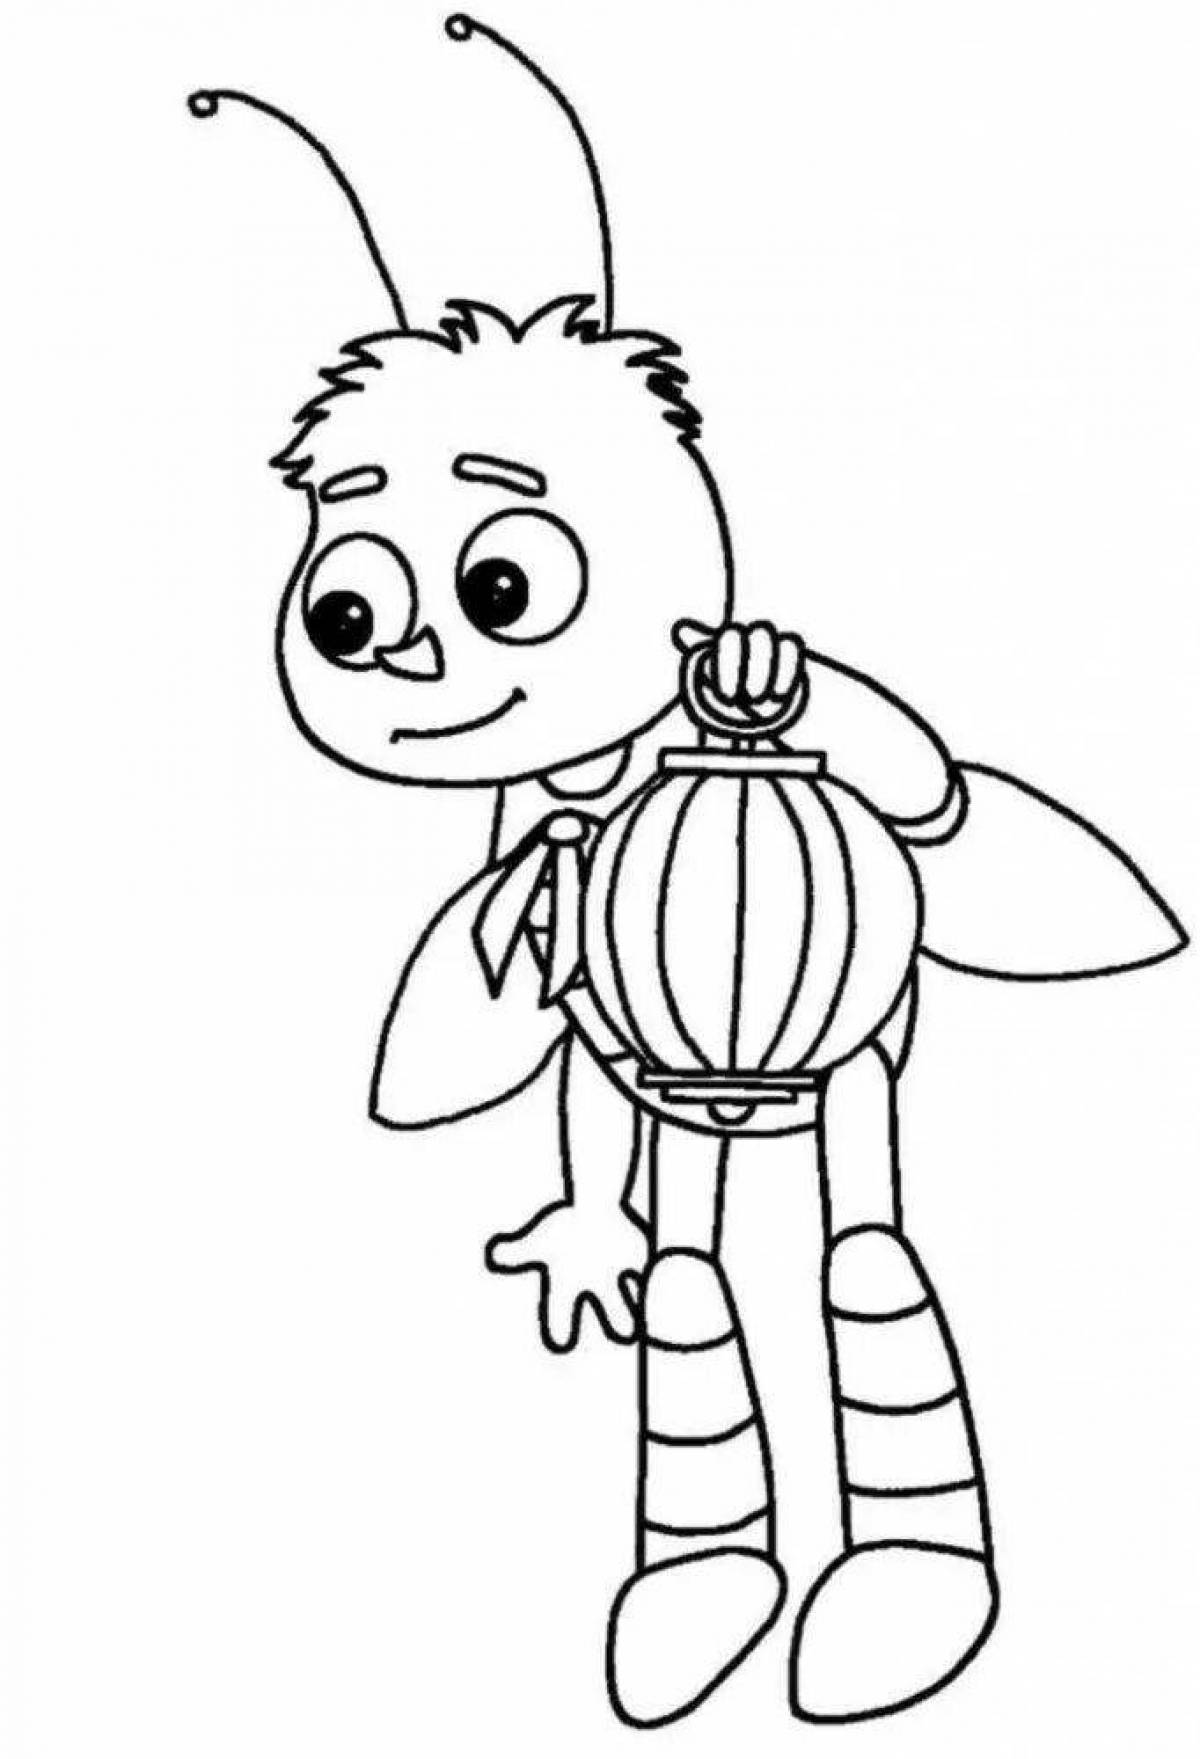 Holiday bees coloring page